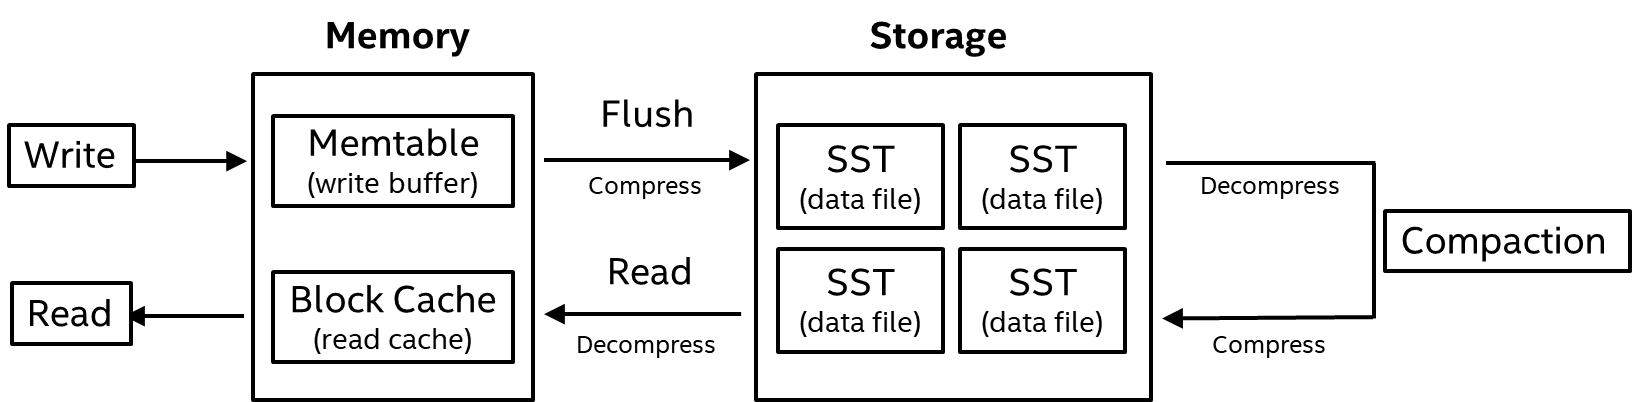 flow chart shows the structure of write and read memory and storage